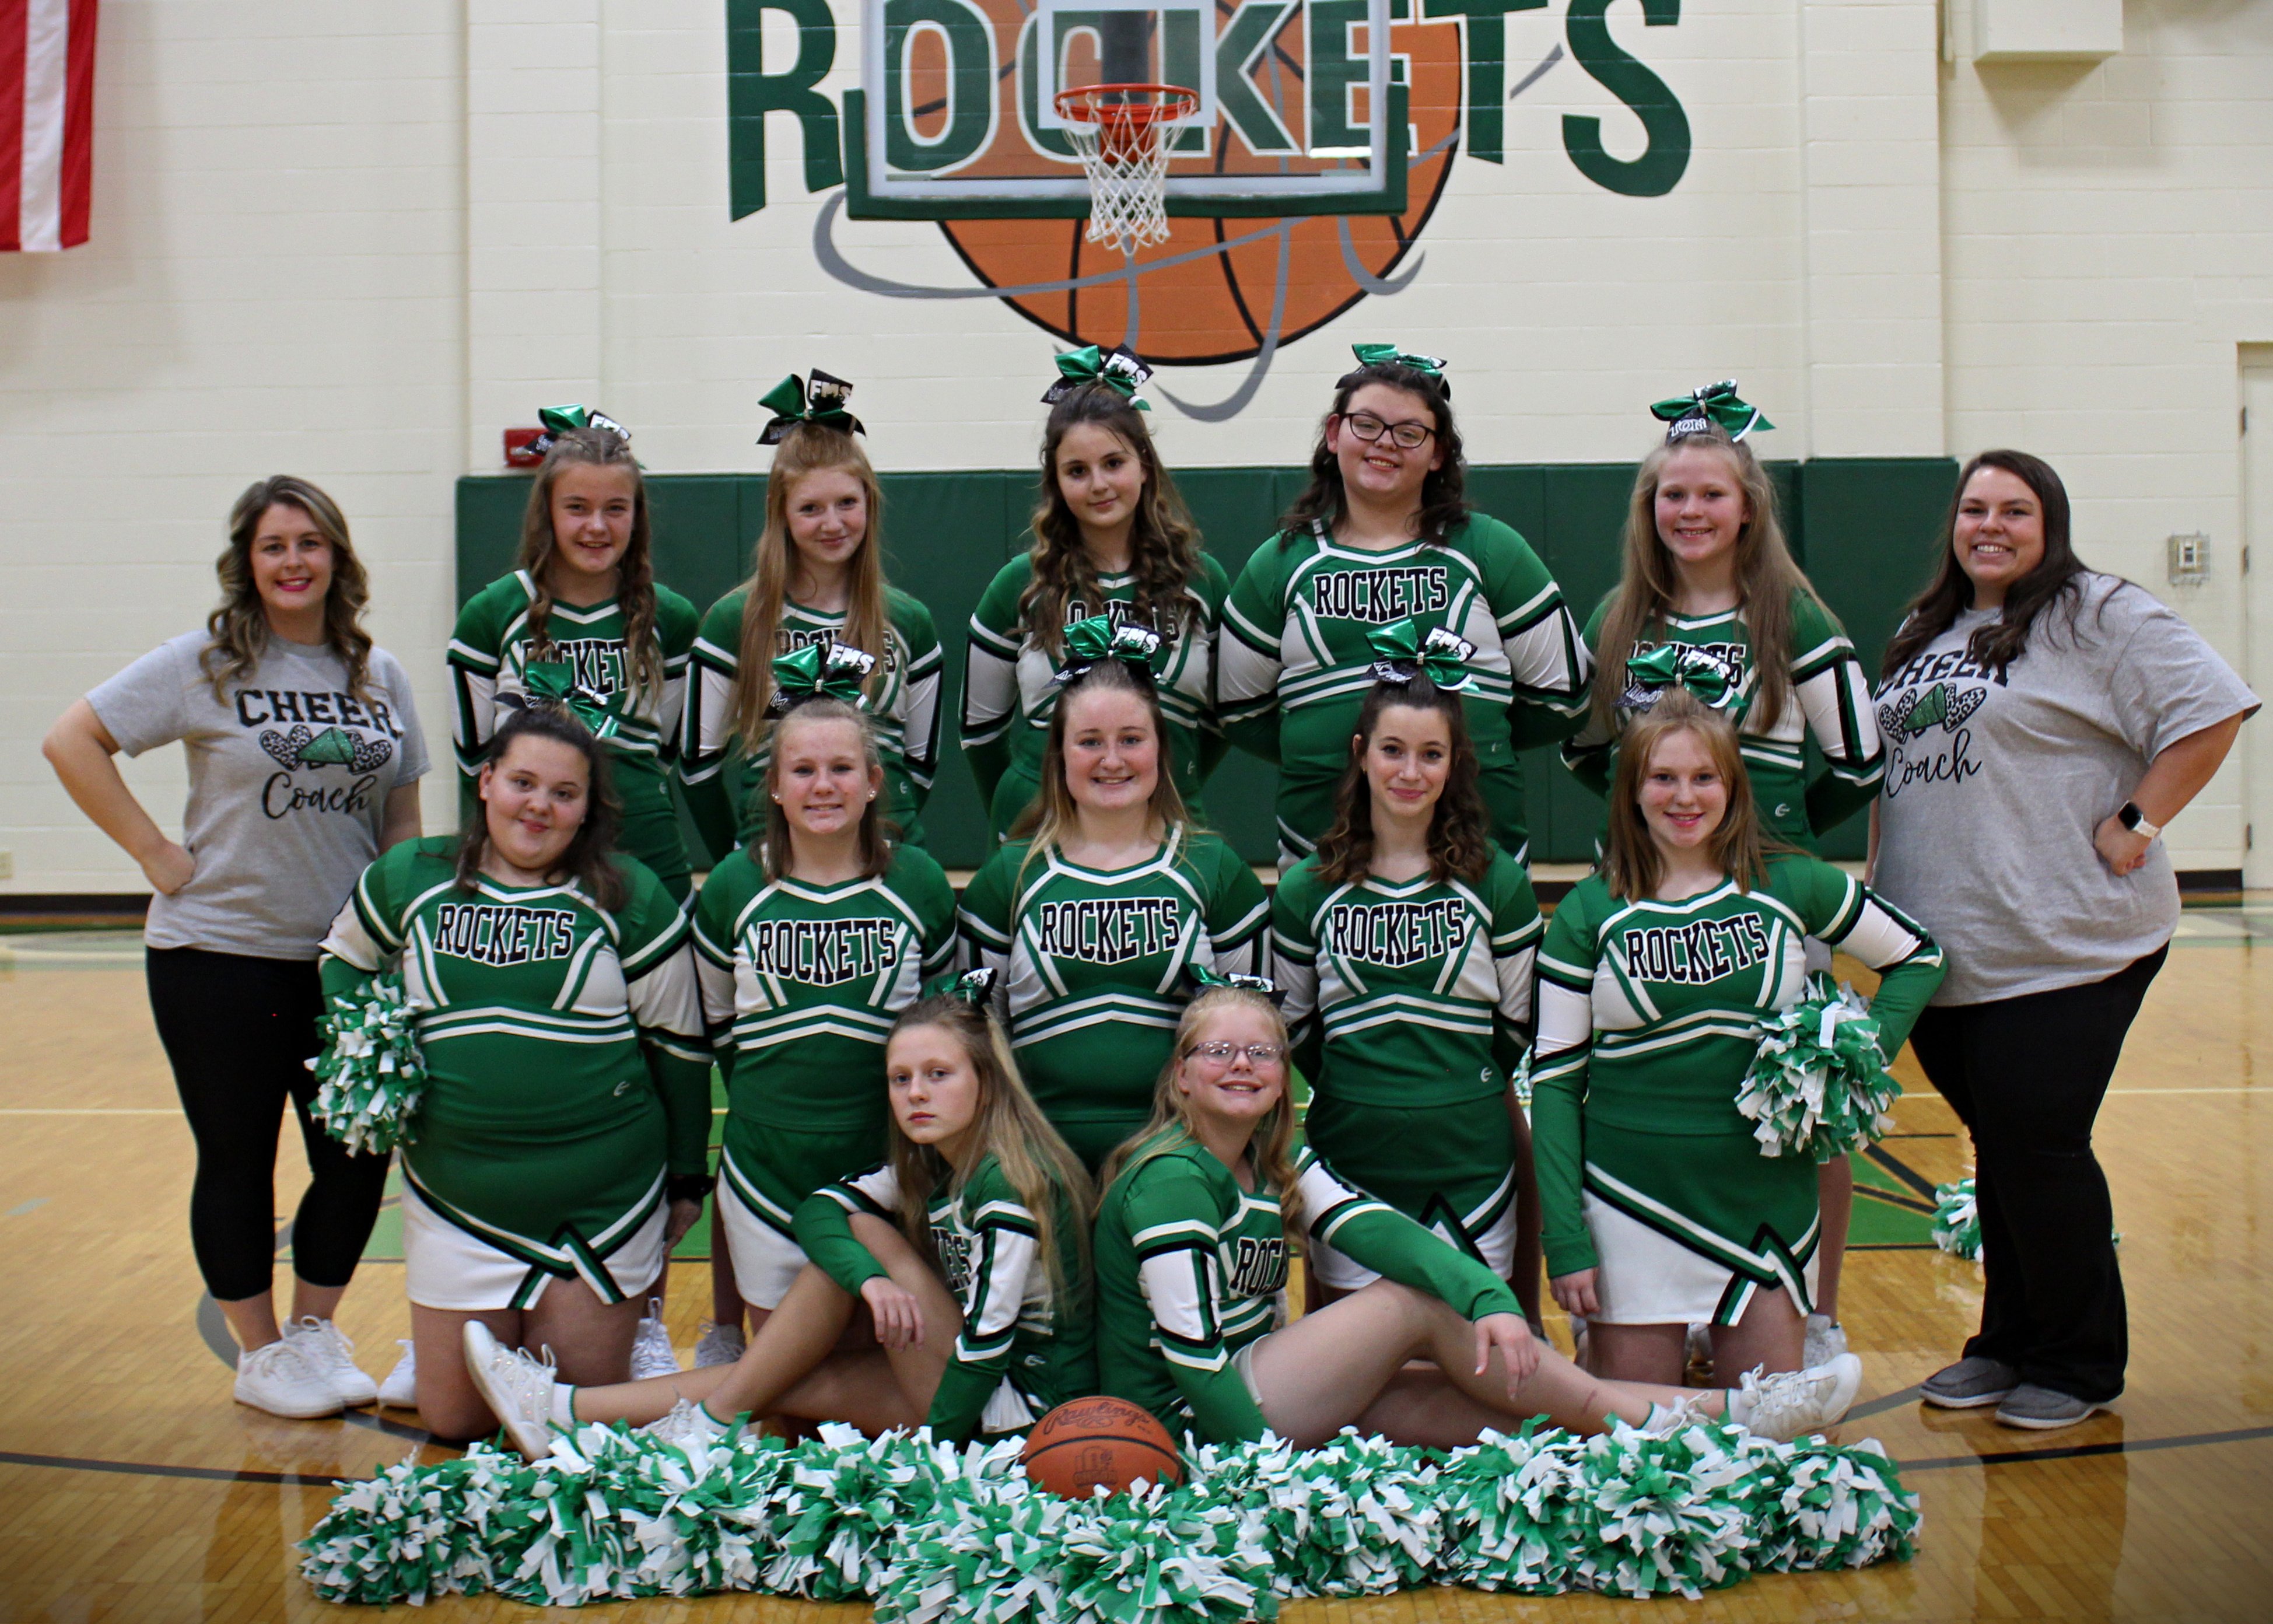 Winter cheer team picture